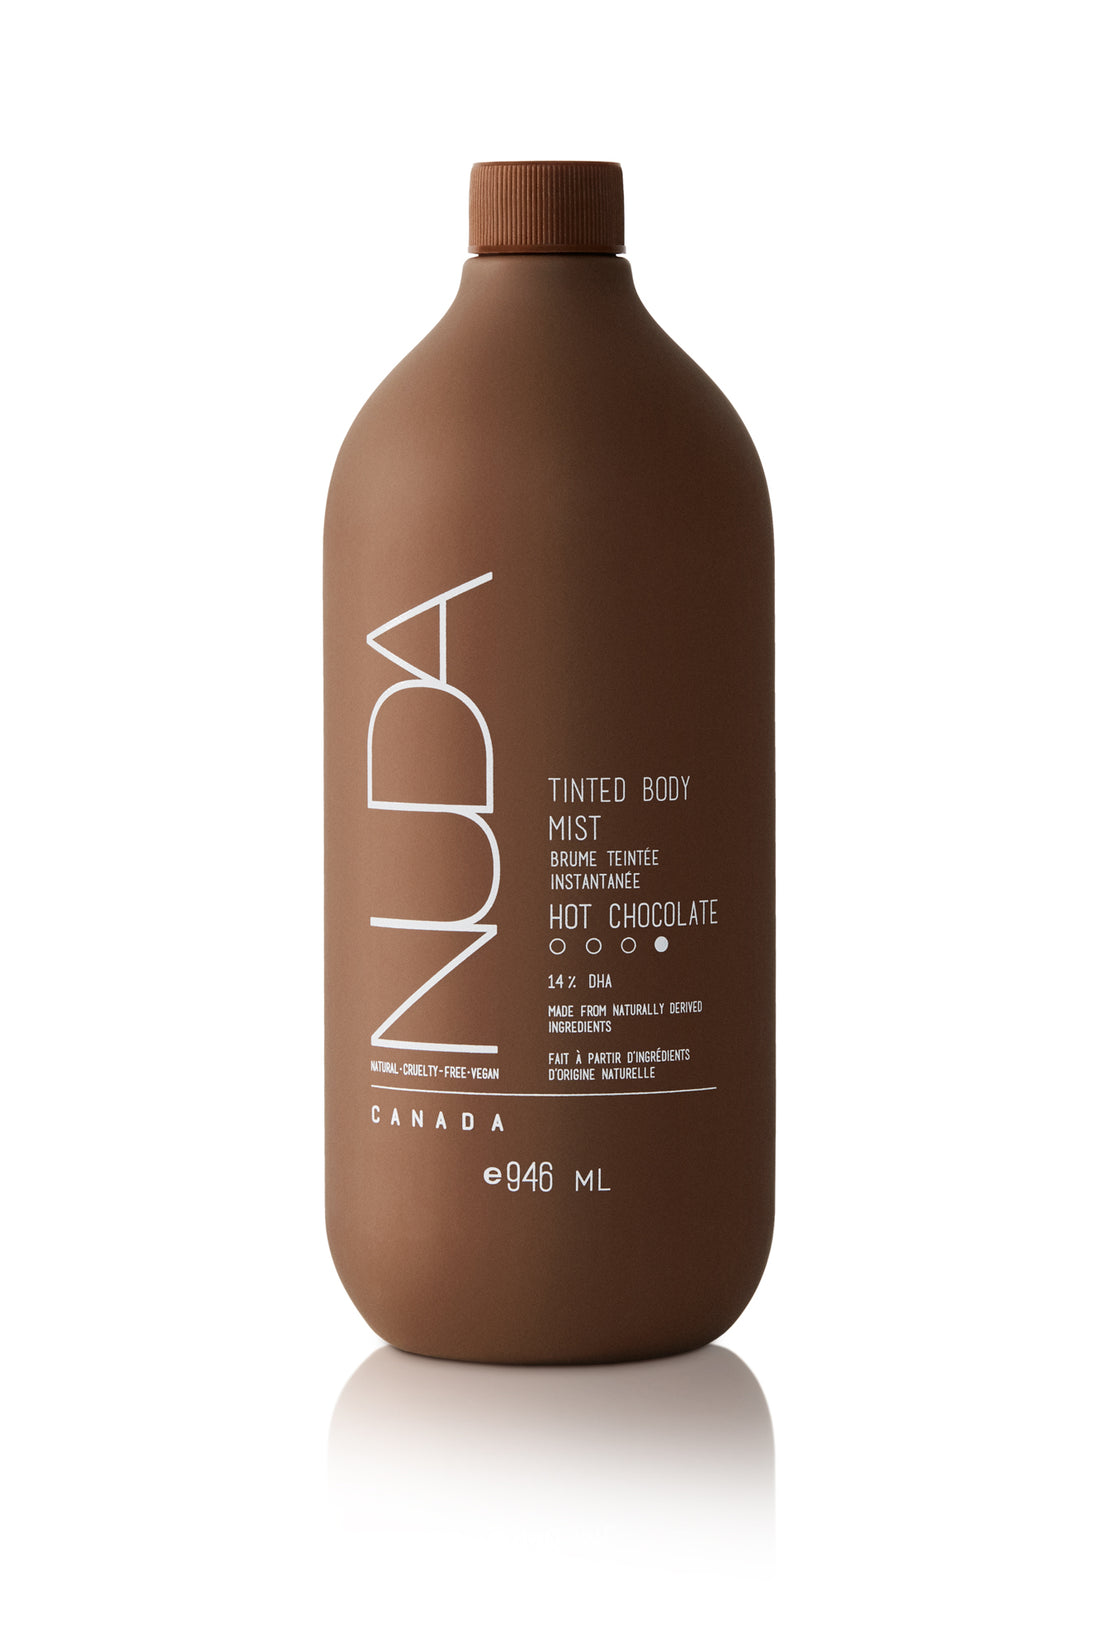 Edgemont A brown opaque bottle labeled "nuda tinted body mist in hot chocolate" with 946 ml capacity, detailing its oil-free and water-resistant properties, against a white background. North Vancouver